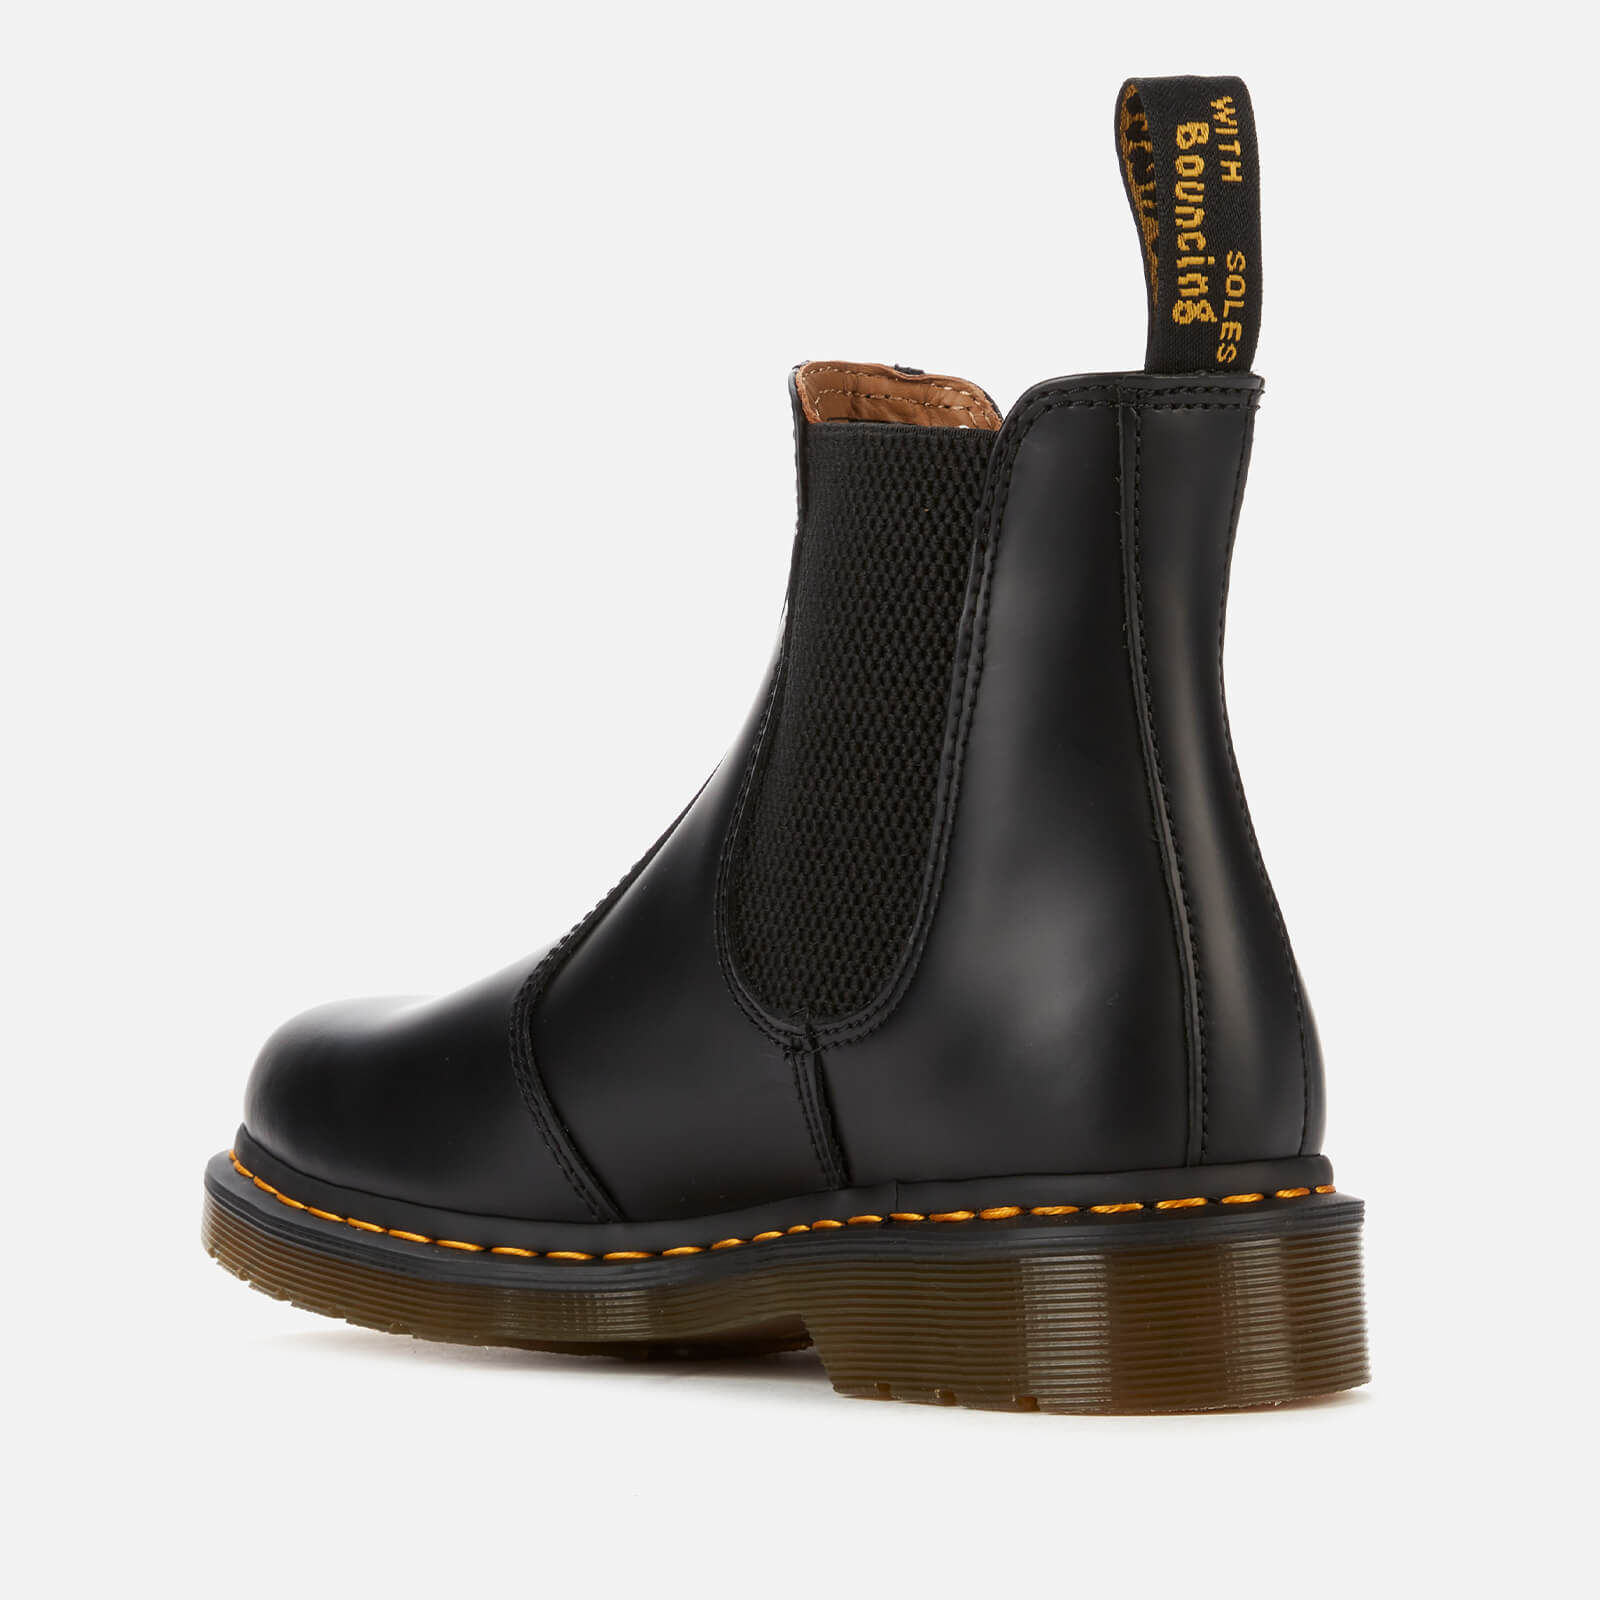 Dr. Martens 2976 Smooth Leather Chelsea Boots - Black - Uk 3